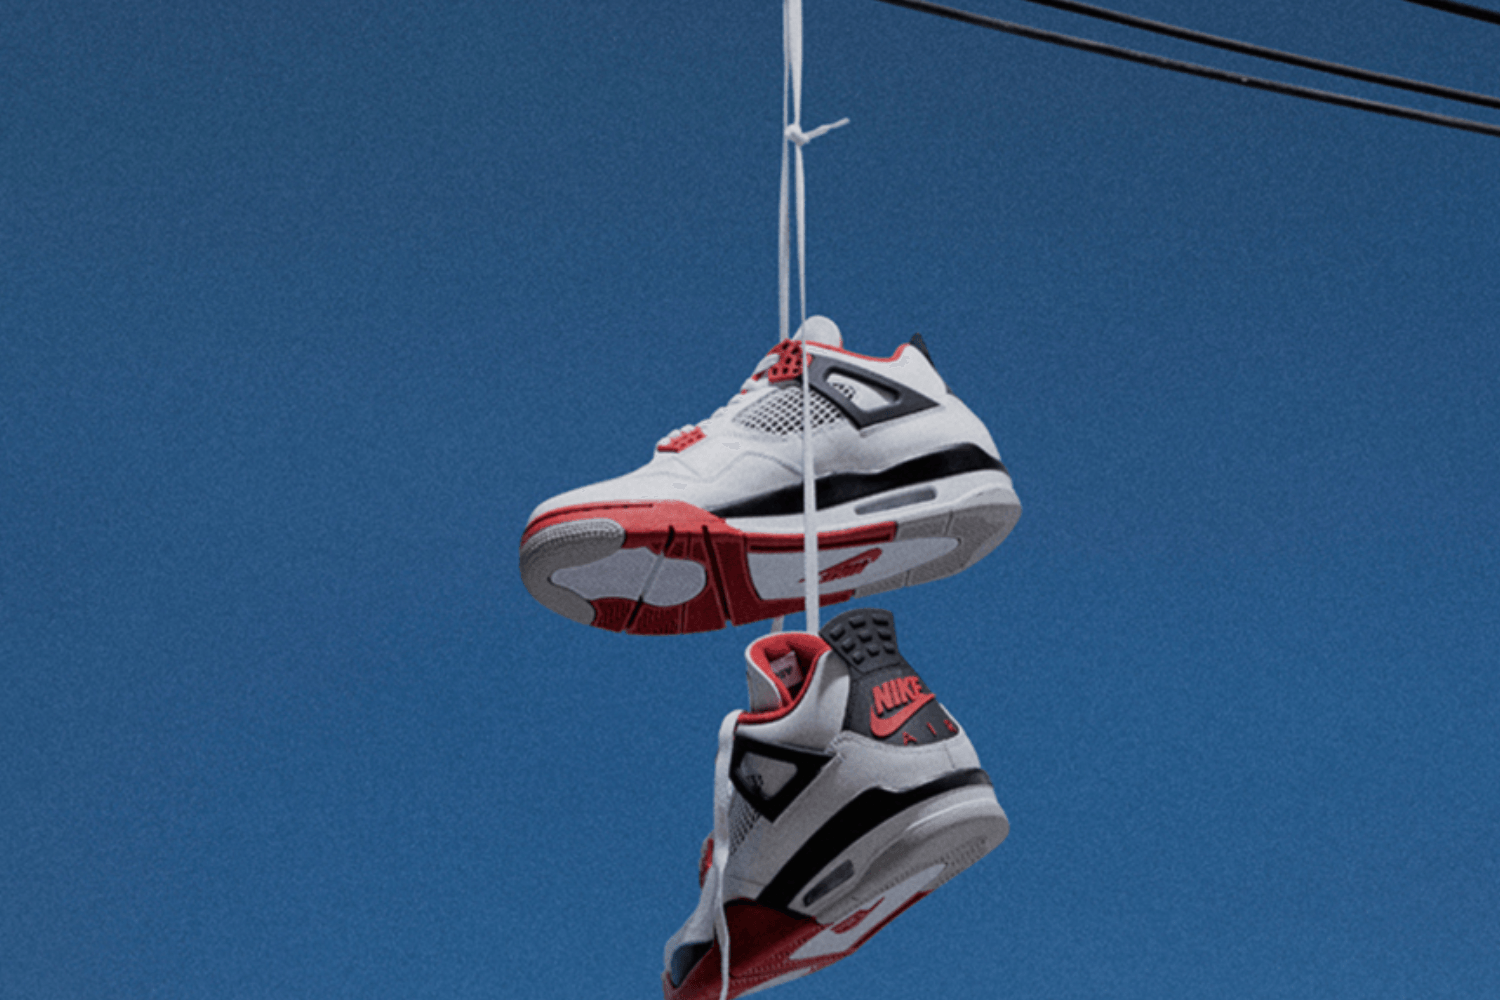 The history and future of the Air Jordan 4 Retro